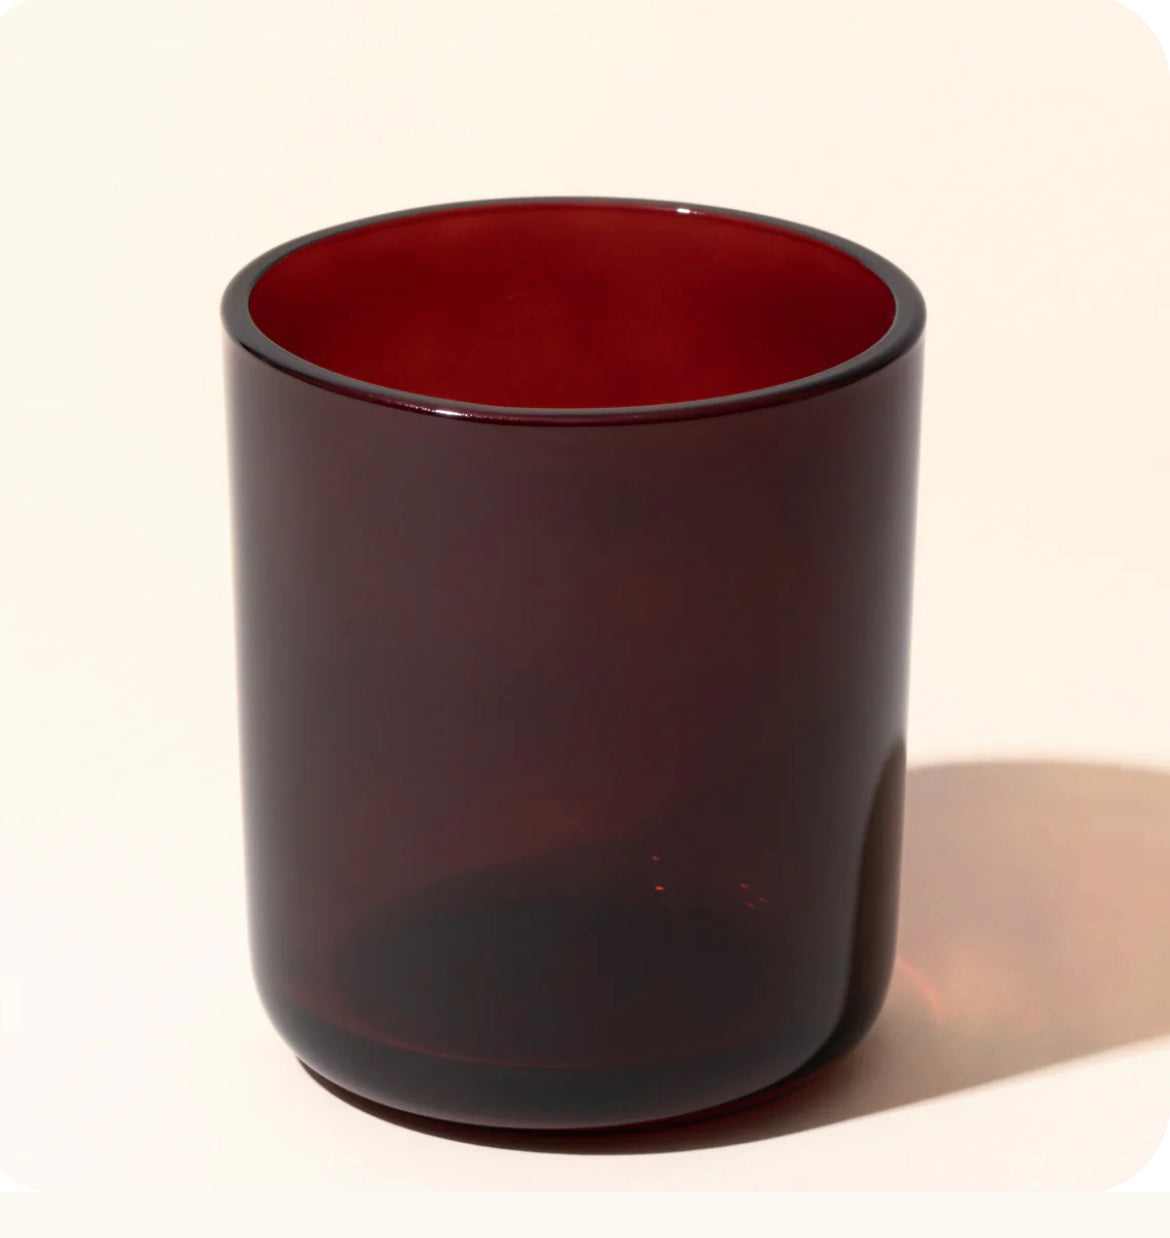 A Custom Fragrance Blended Candle - 12oz Aura Iridescent Vessel with lid